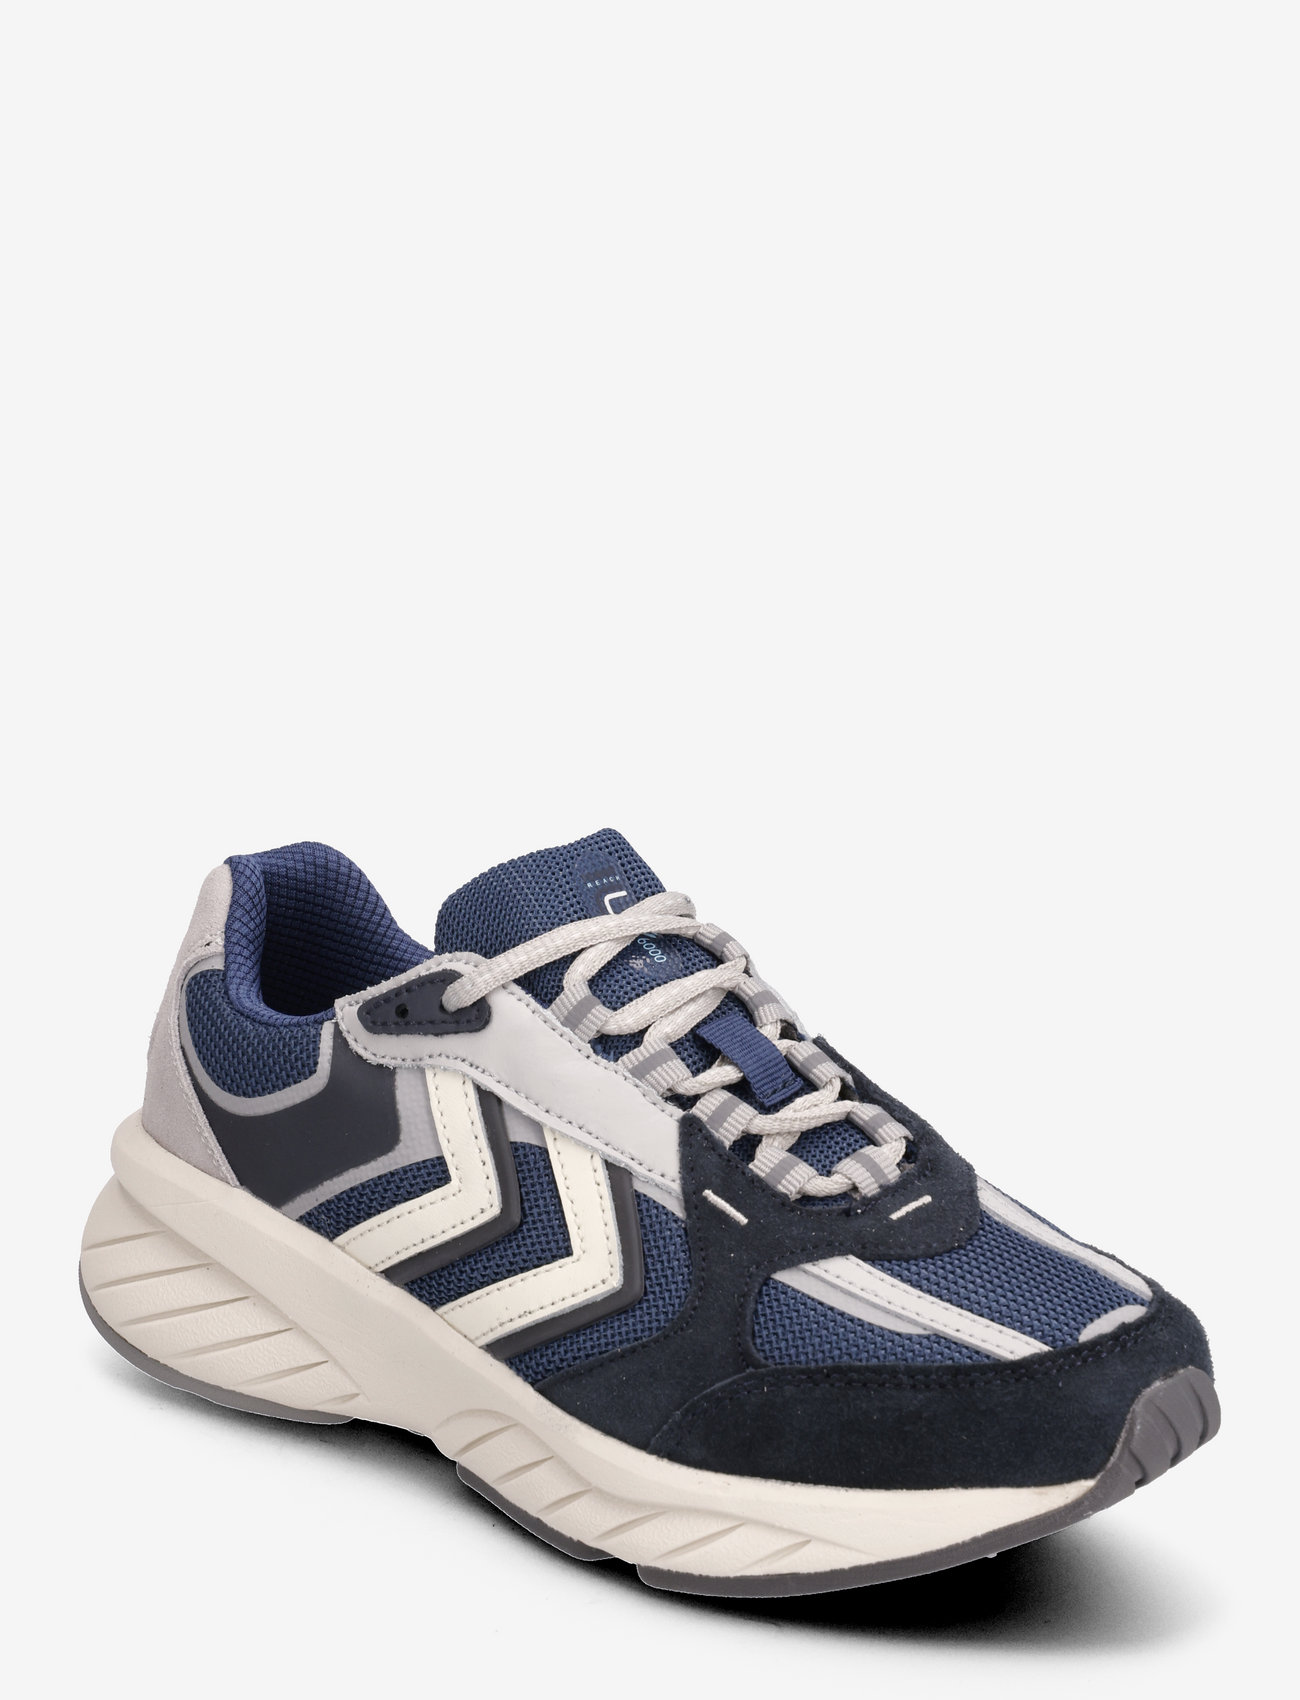 Hummel - REACH LX 6000 URBAN - lave sneakers - navy/ensign blue - 0